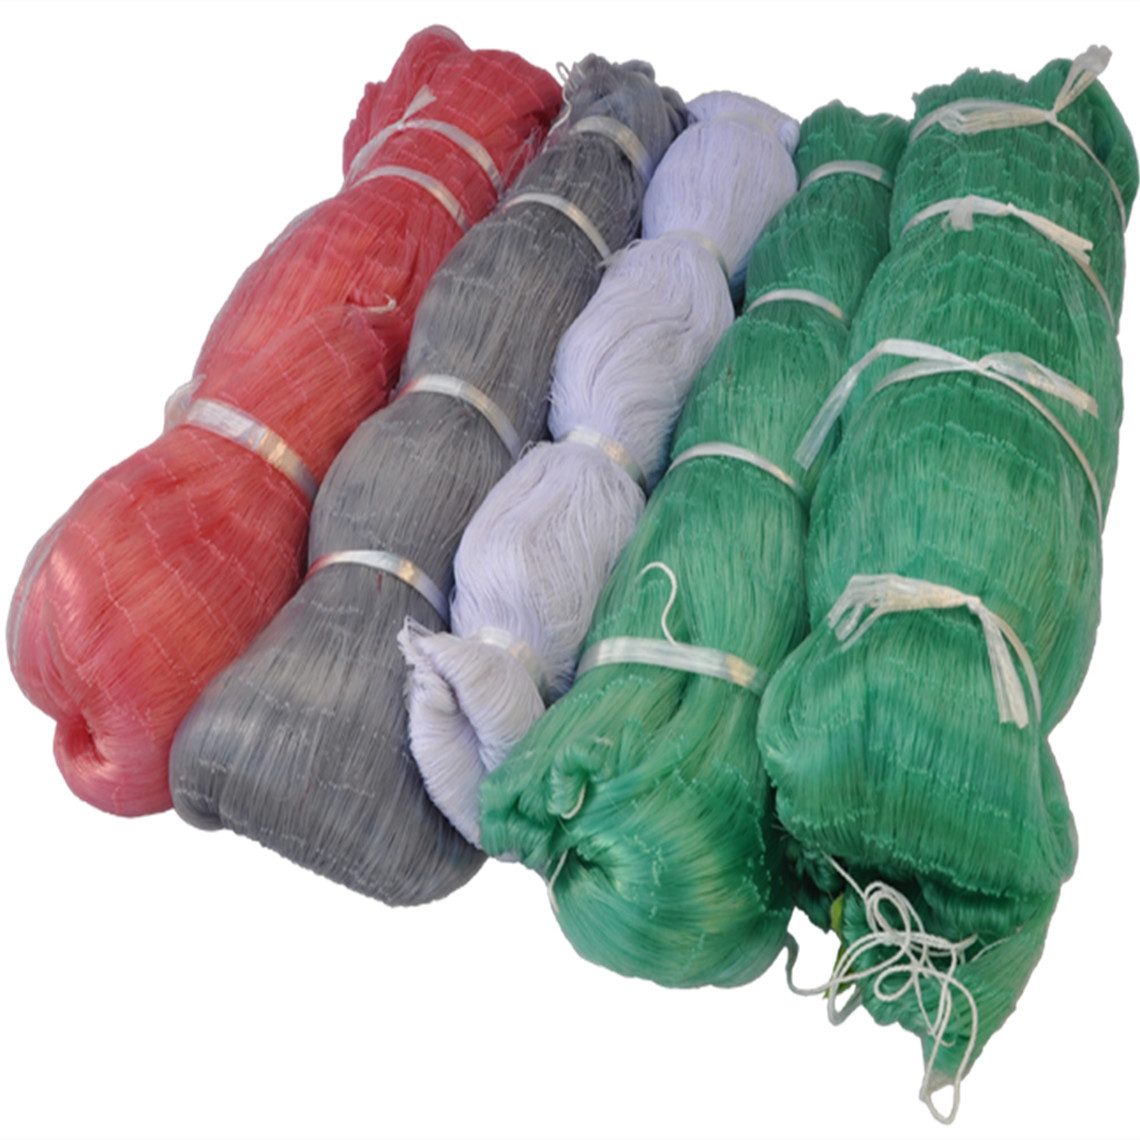 Wholesale single knot or double knot Fishing Net, fishing net from china suppliers